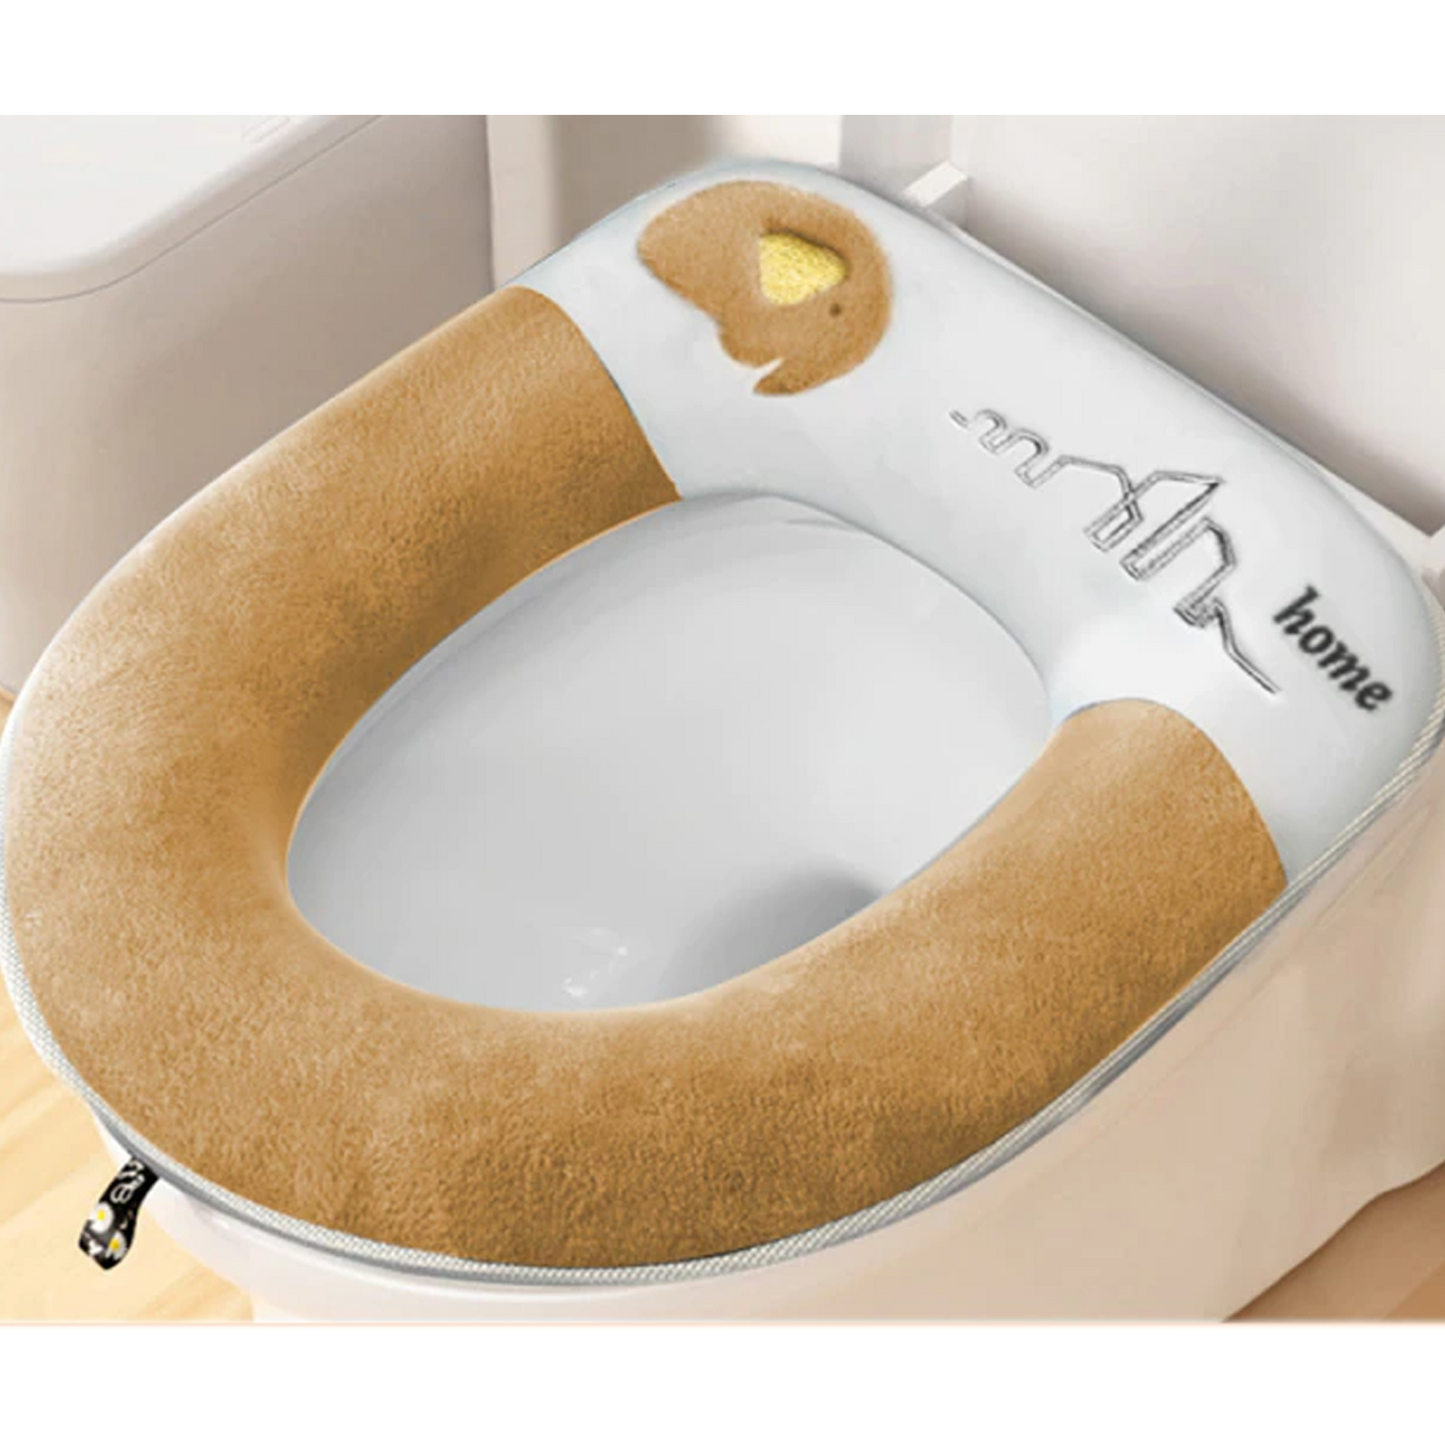 Winter Warm Toilet Seat Cover